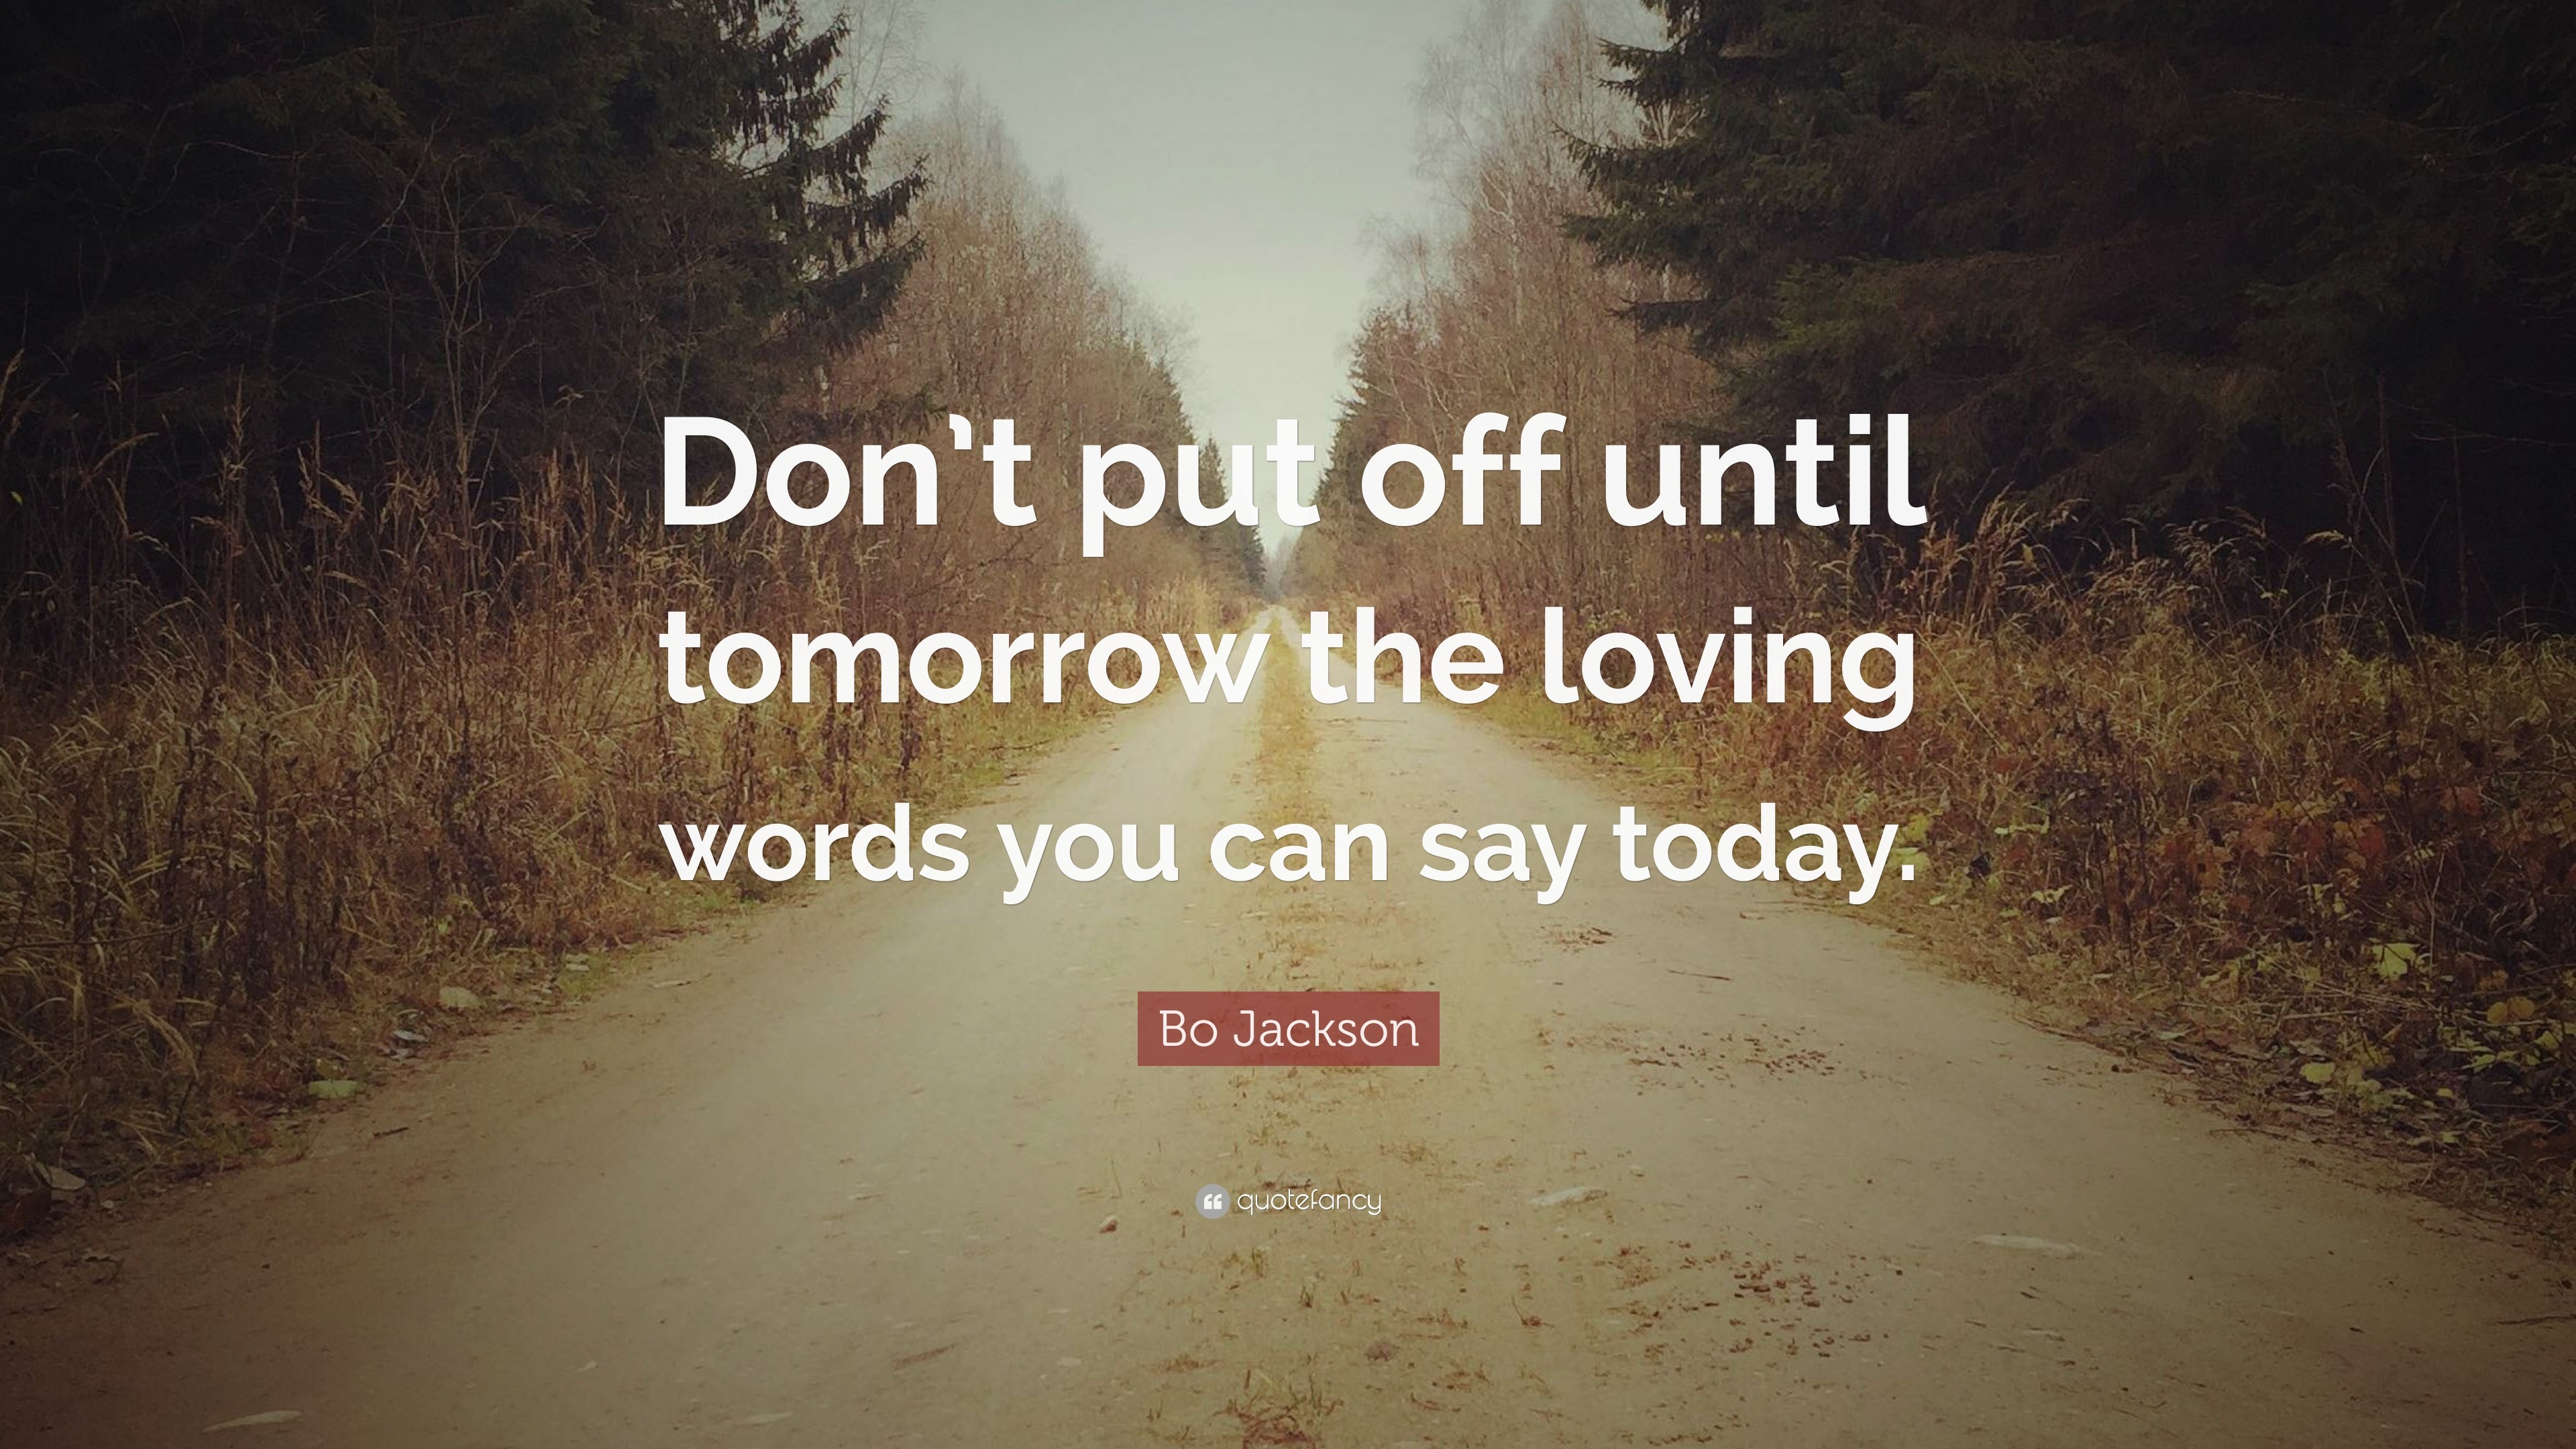 3840x2160 Bo Jackson Quote: “Don't put off until tomorrow the loving words you